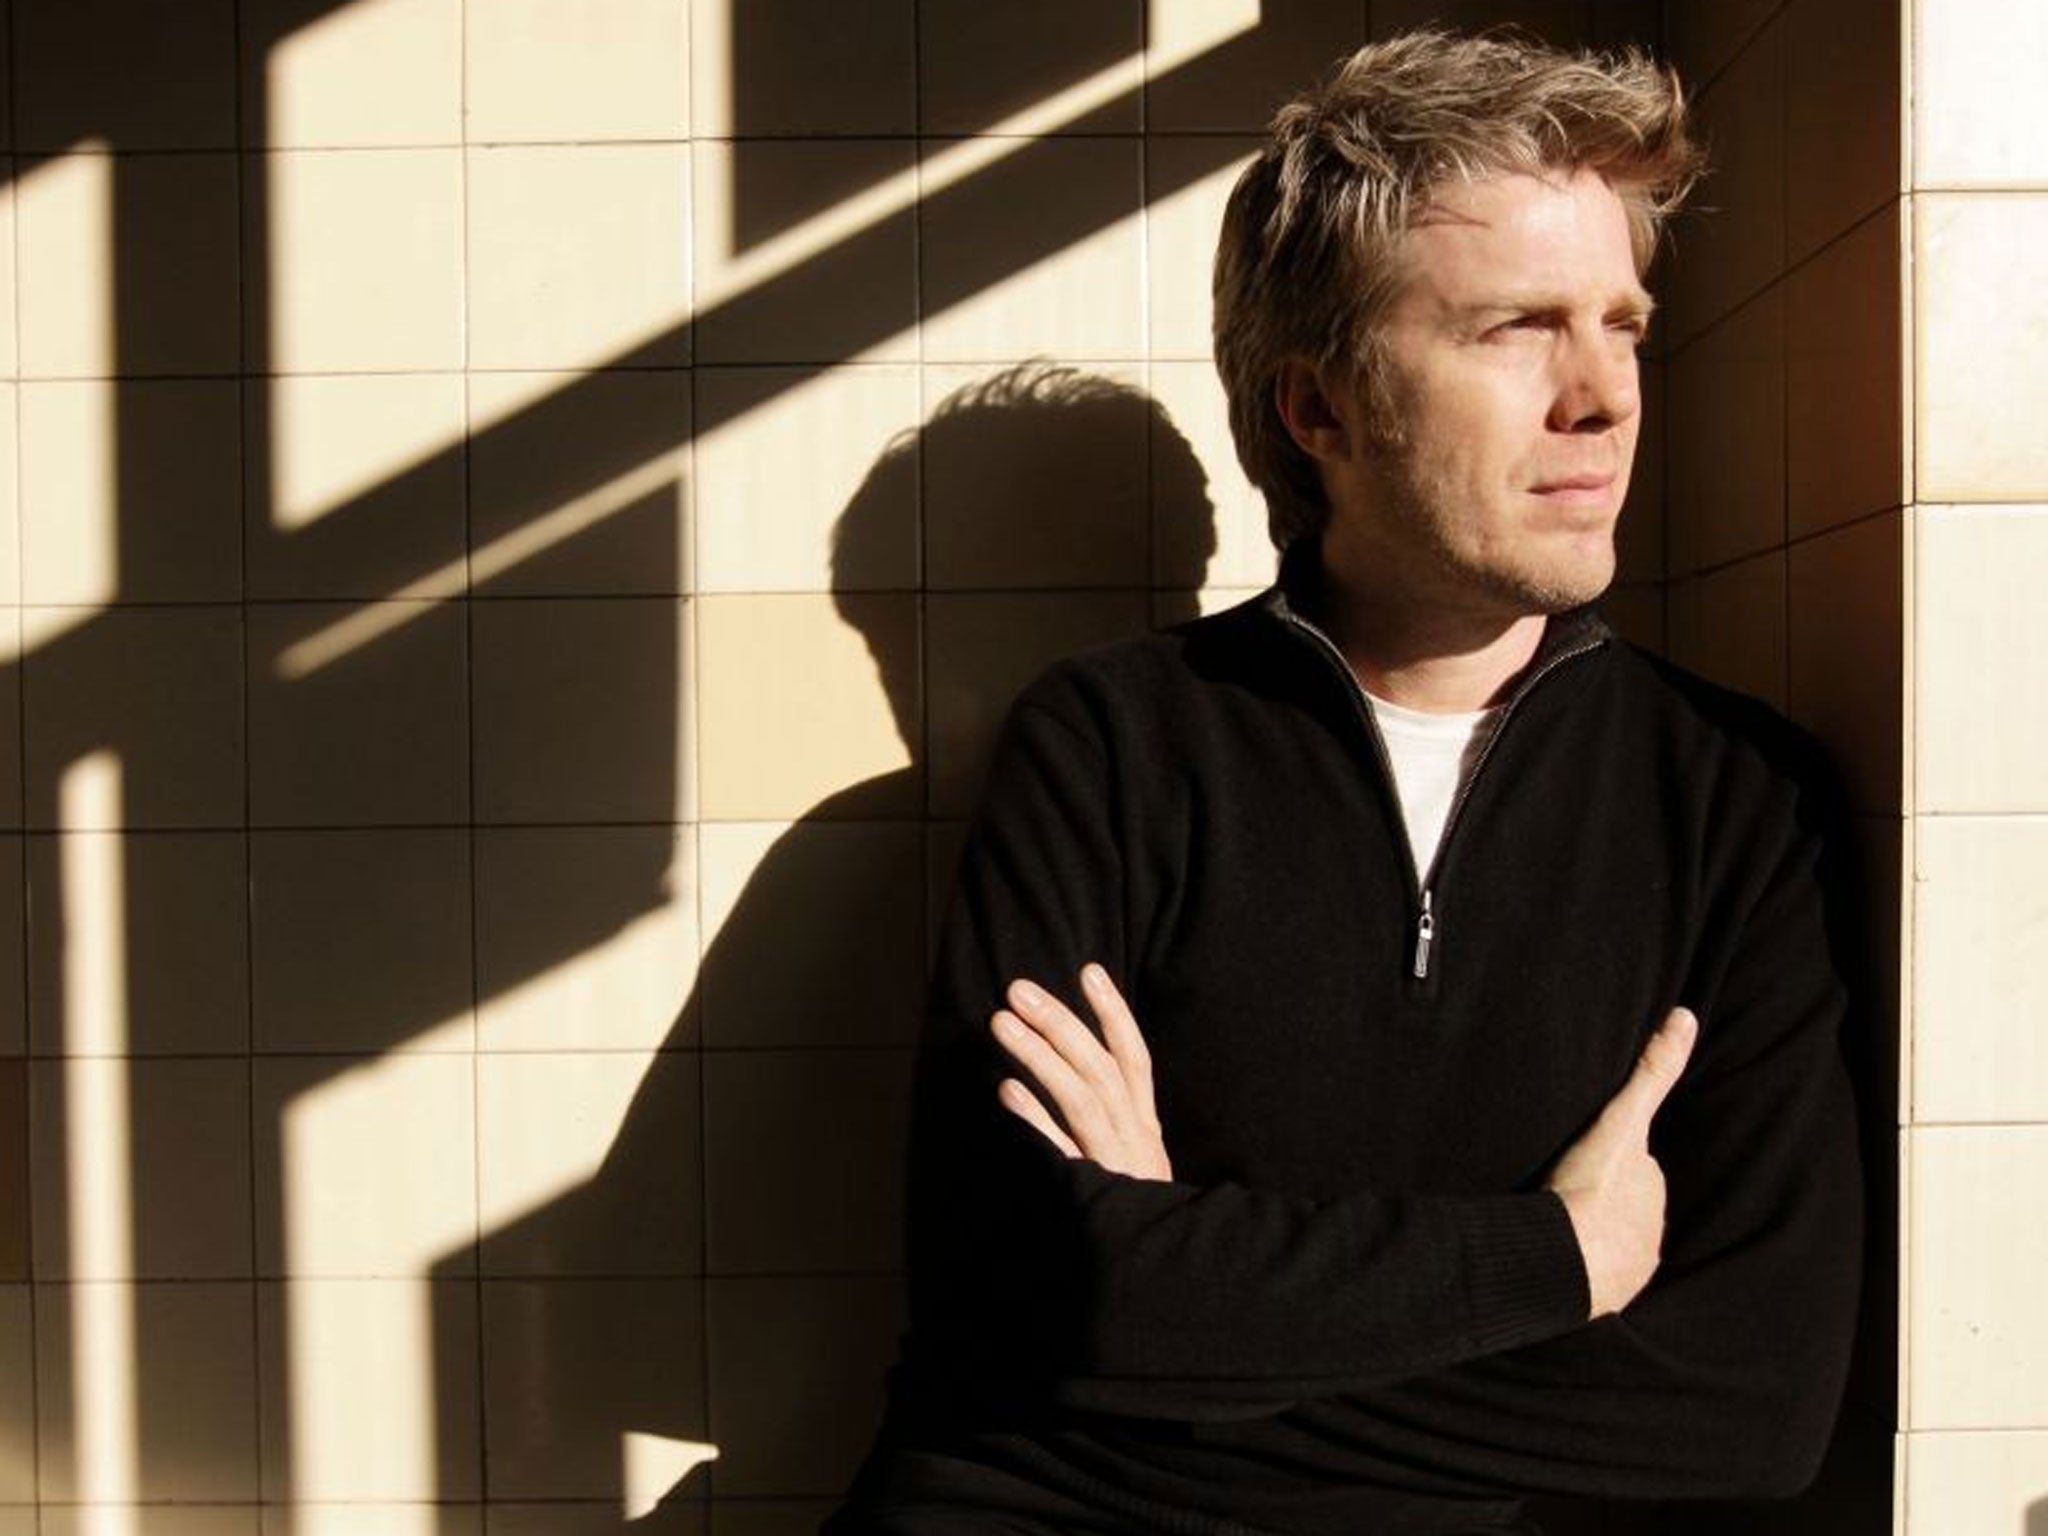 Kyle Eastwood has carved his own groove in the jazz world